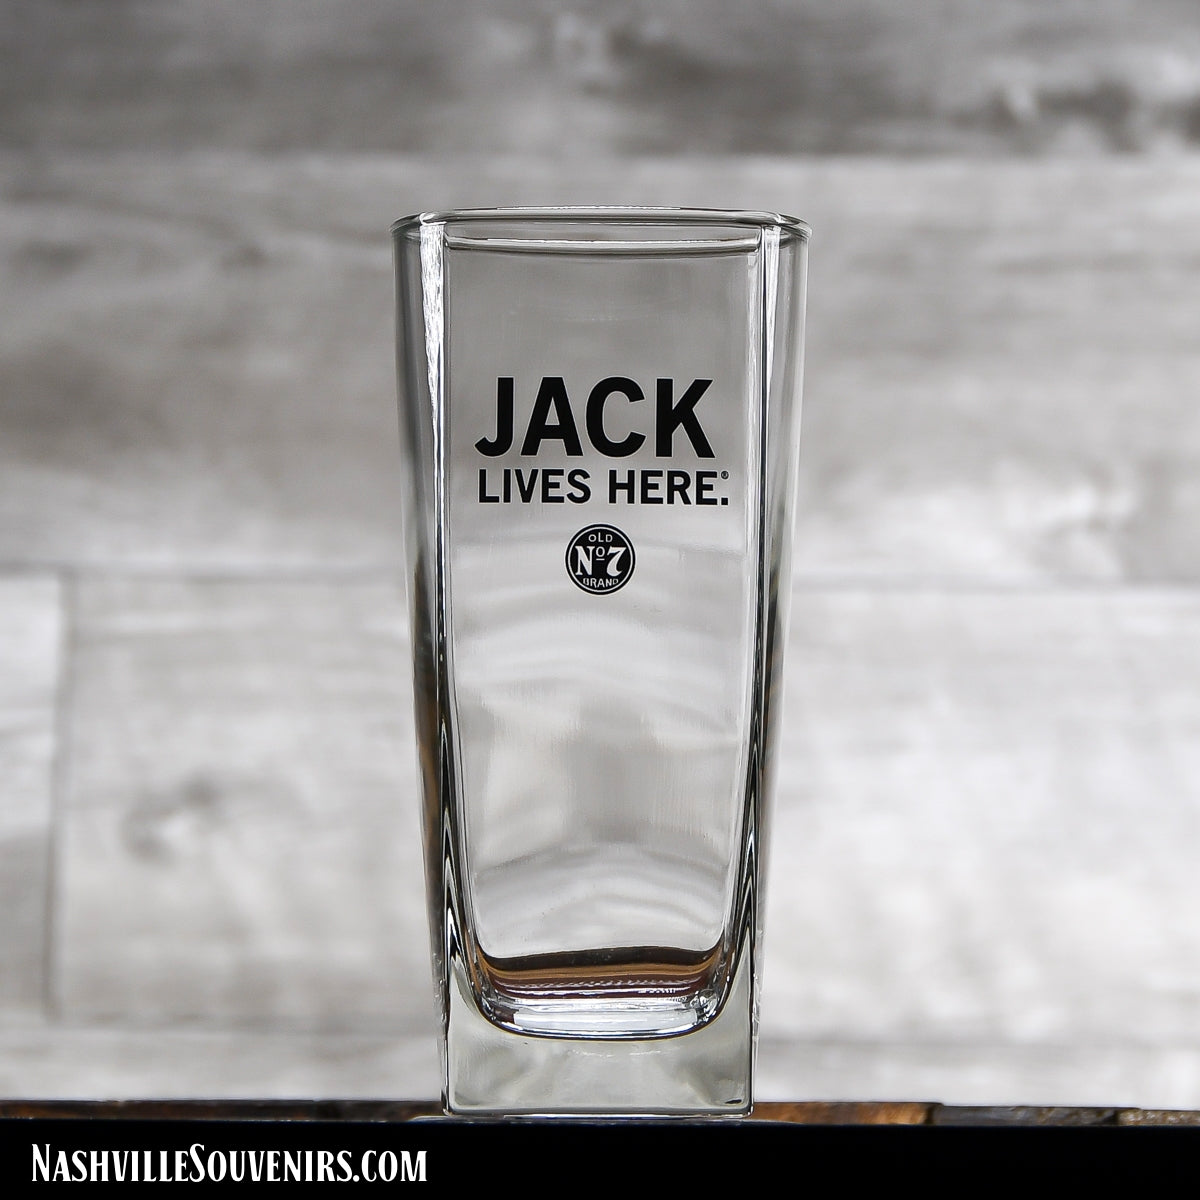 This officially licensed Jack Daniels "Jack Lives Here" Tall Rocks glass. It features "Jack Lives Here" in bold black letters with a small Old No.7 Brand circular logo below. Get yours today with FREE SHIPPING on all US orders over $75!